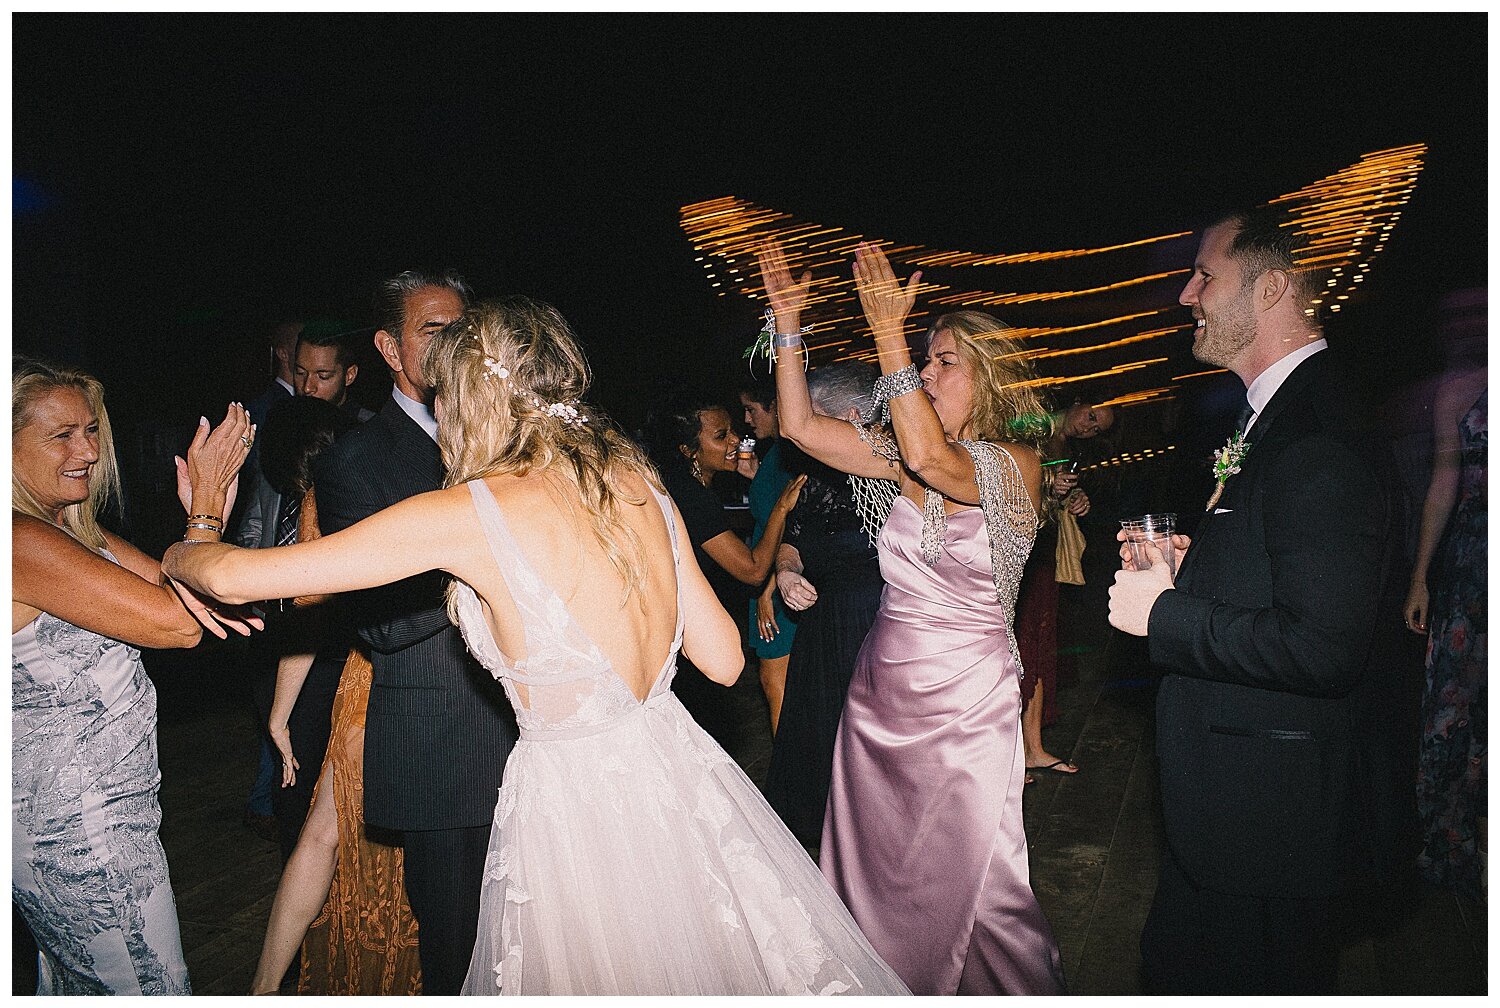 guests dancing at wedding reception at Old Indian Creek Farm in Olivet, Michigan